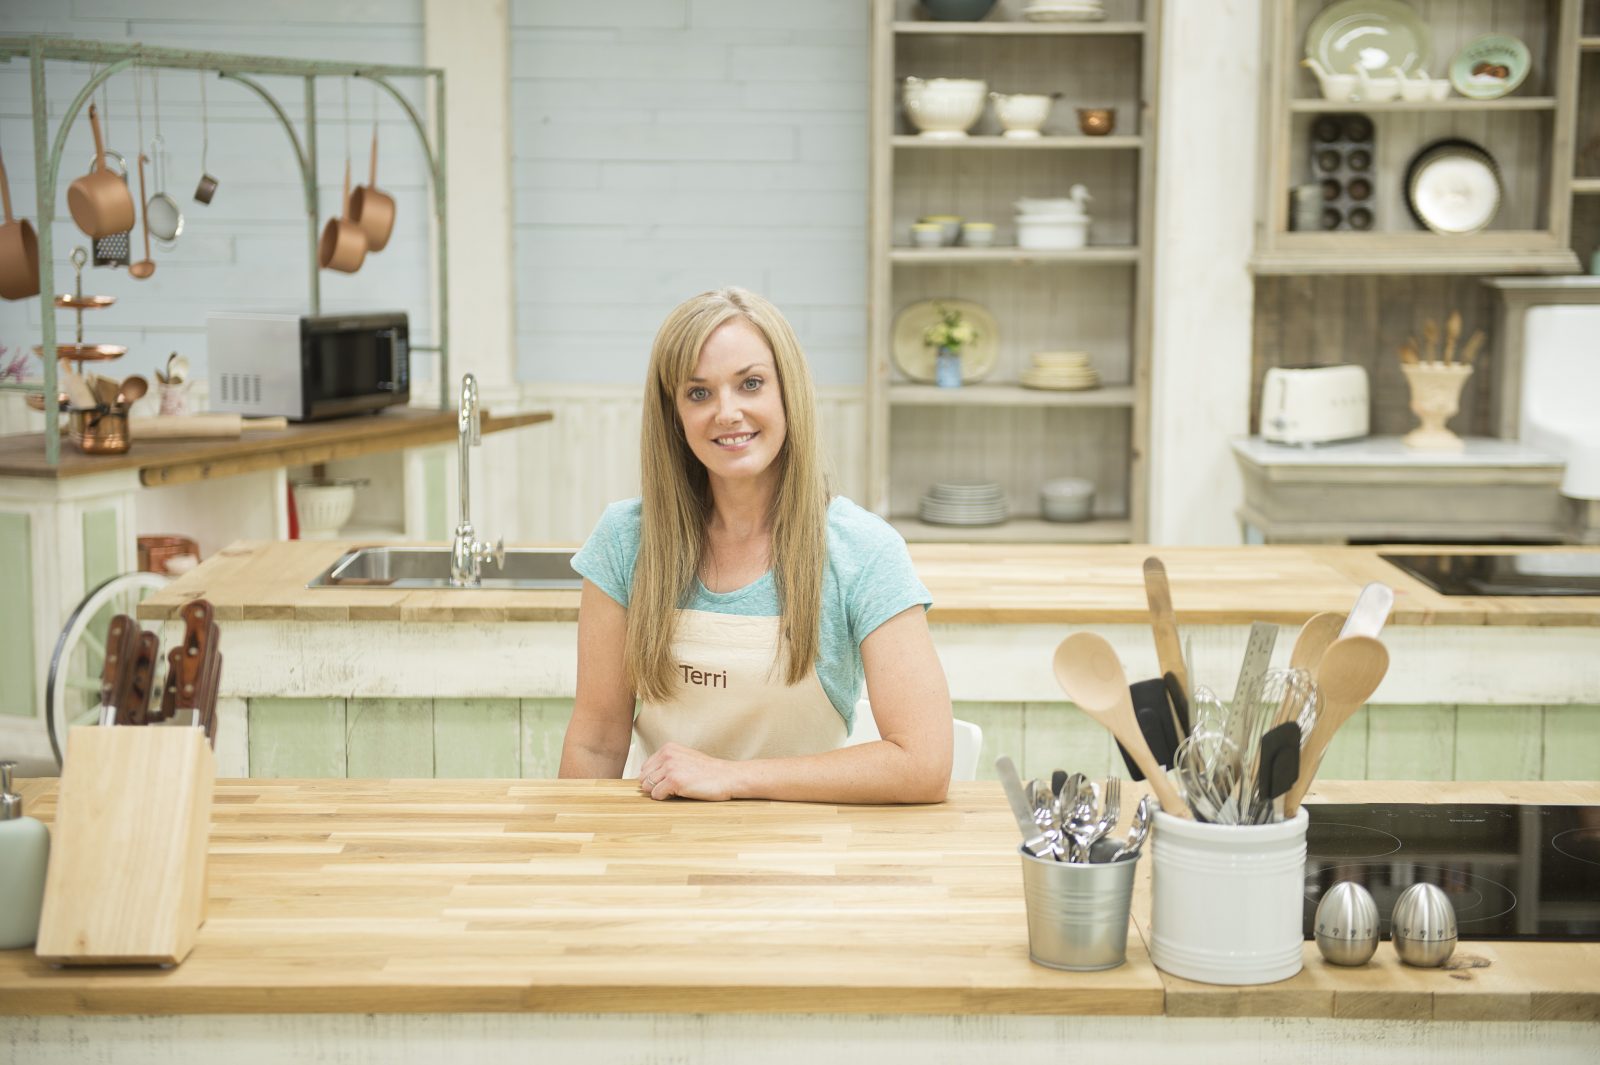 Cornwall Native to appear on Great Canadian Baking Show